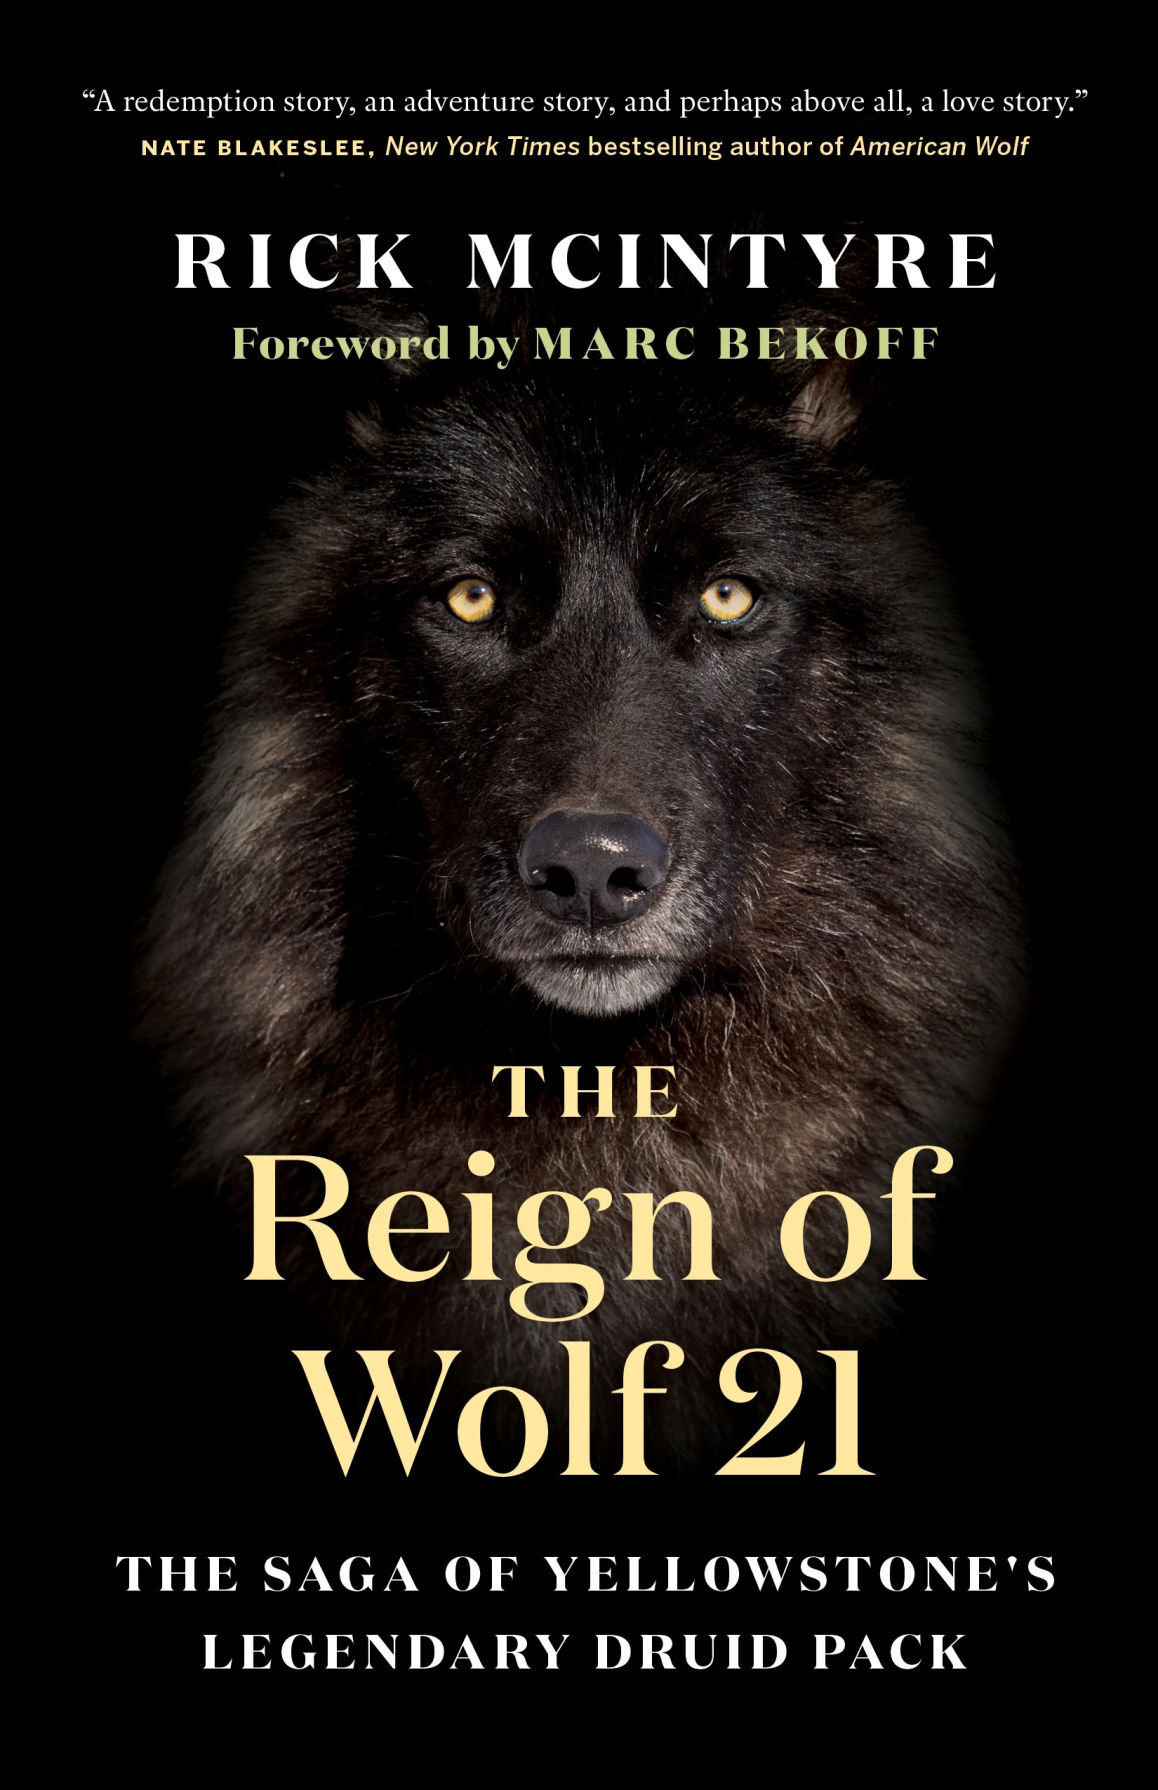 The Reign of Wolf 21 by Rick McIntyre